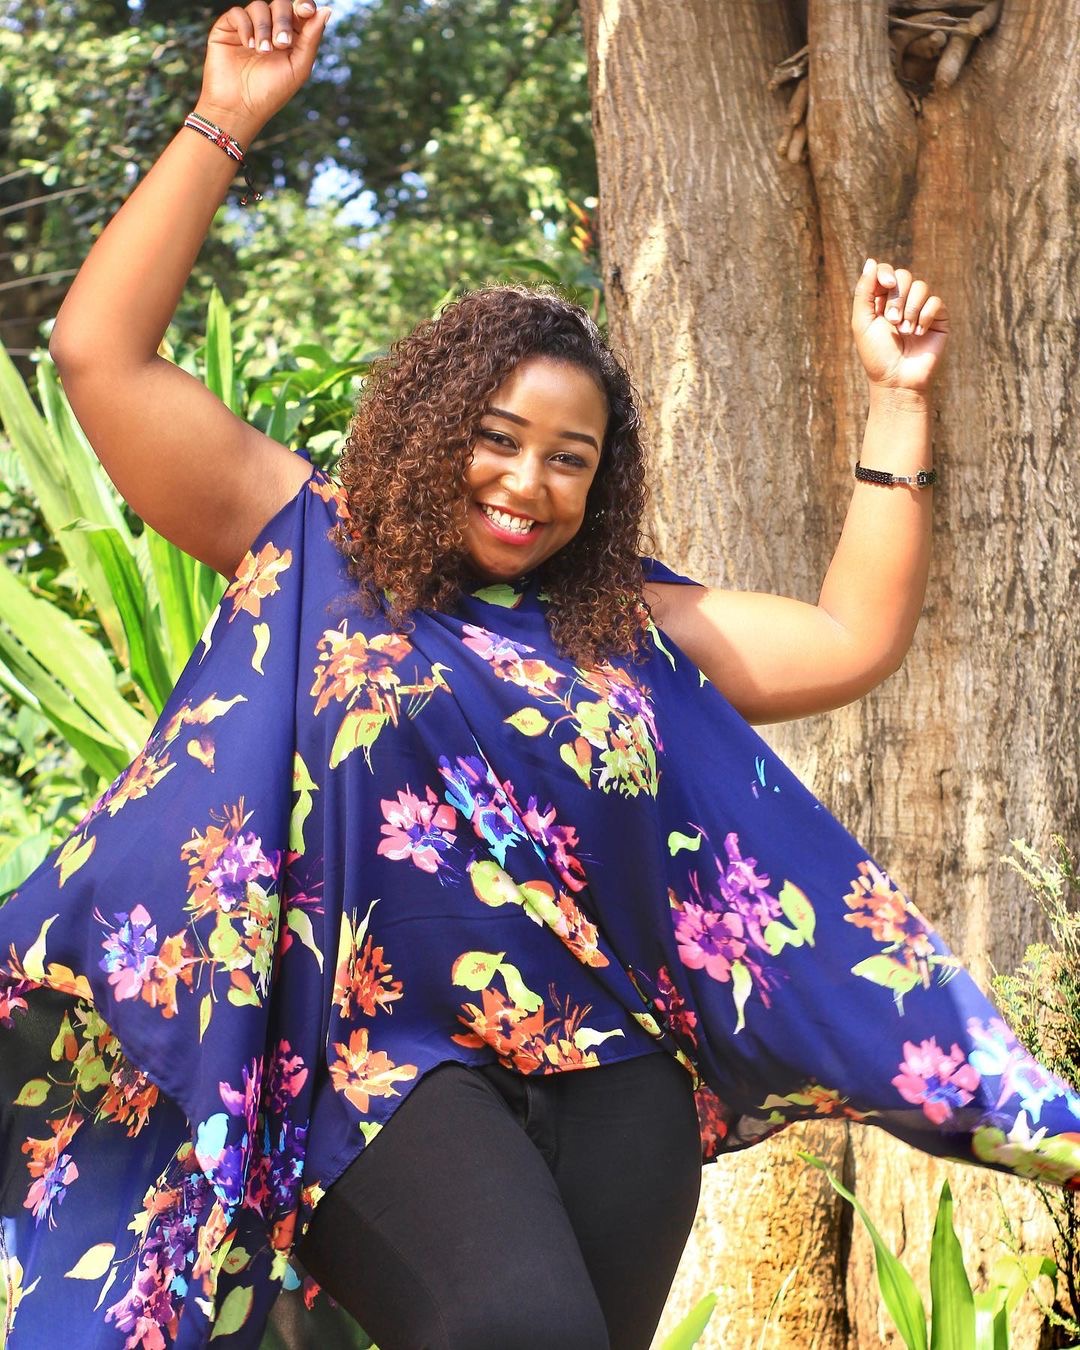 Baby rabies: Betty Kyallo is aware she is running out of time